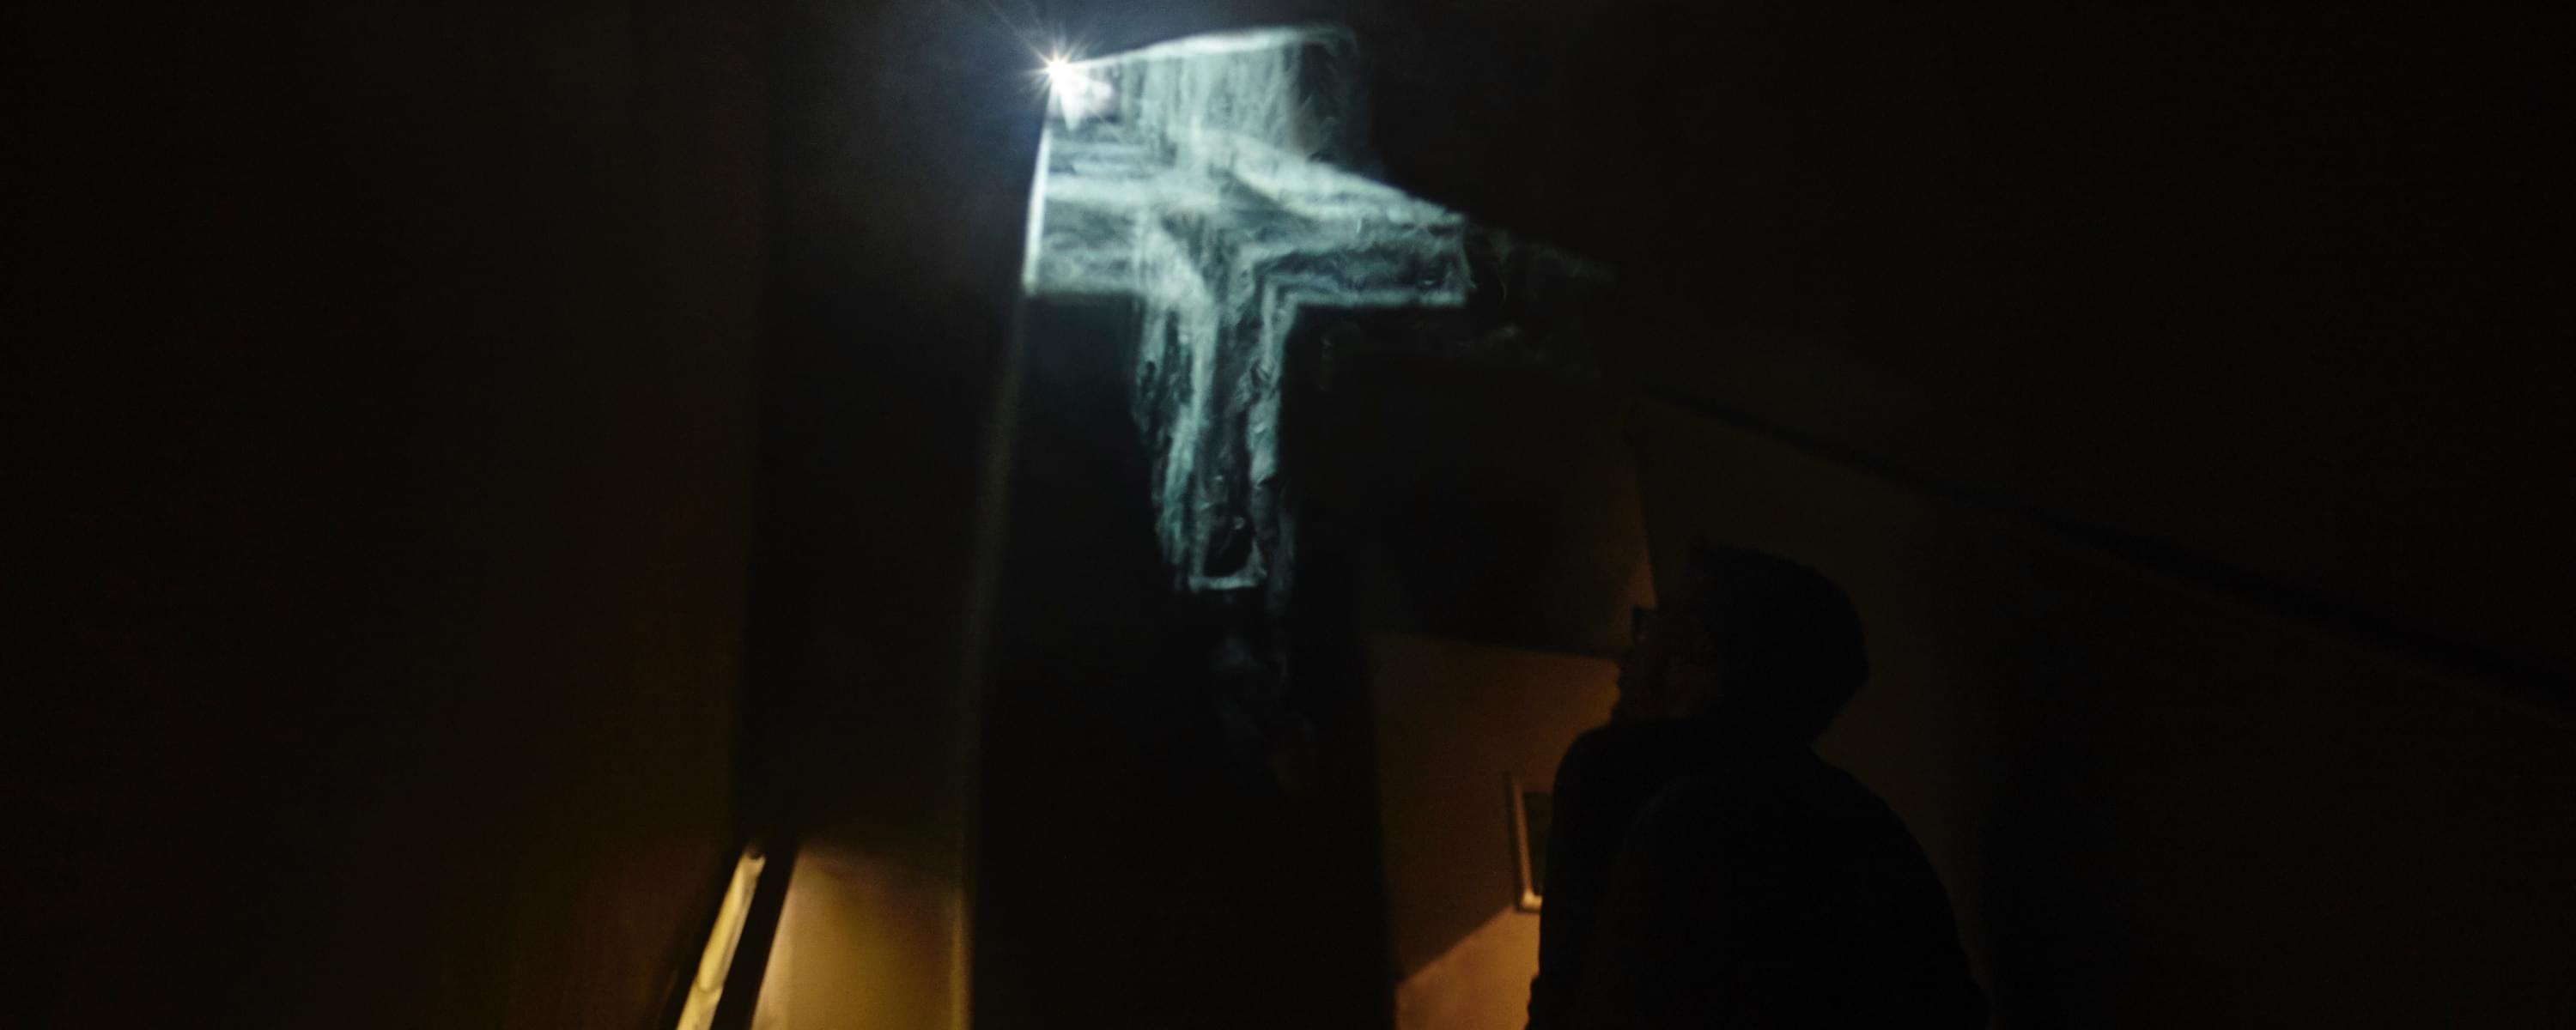 Photograph; it is extremely dark, on the right is an inkling of an illumined handrail indicating a staircase. In the middle is a floating, cloudy, illuminated crucifix in three dimensions; towards the bottom right, if one squints, one can make out a viewer in the darkness looking up at the ghostly crucifix